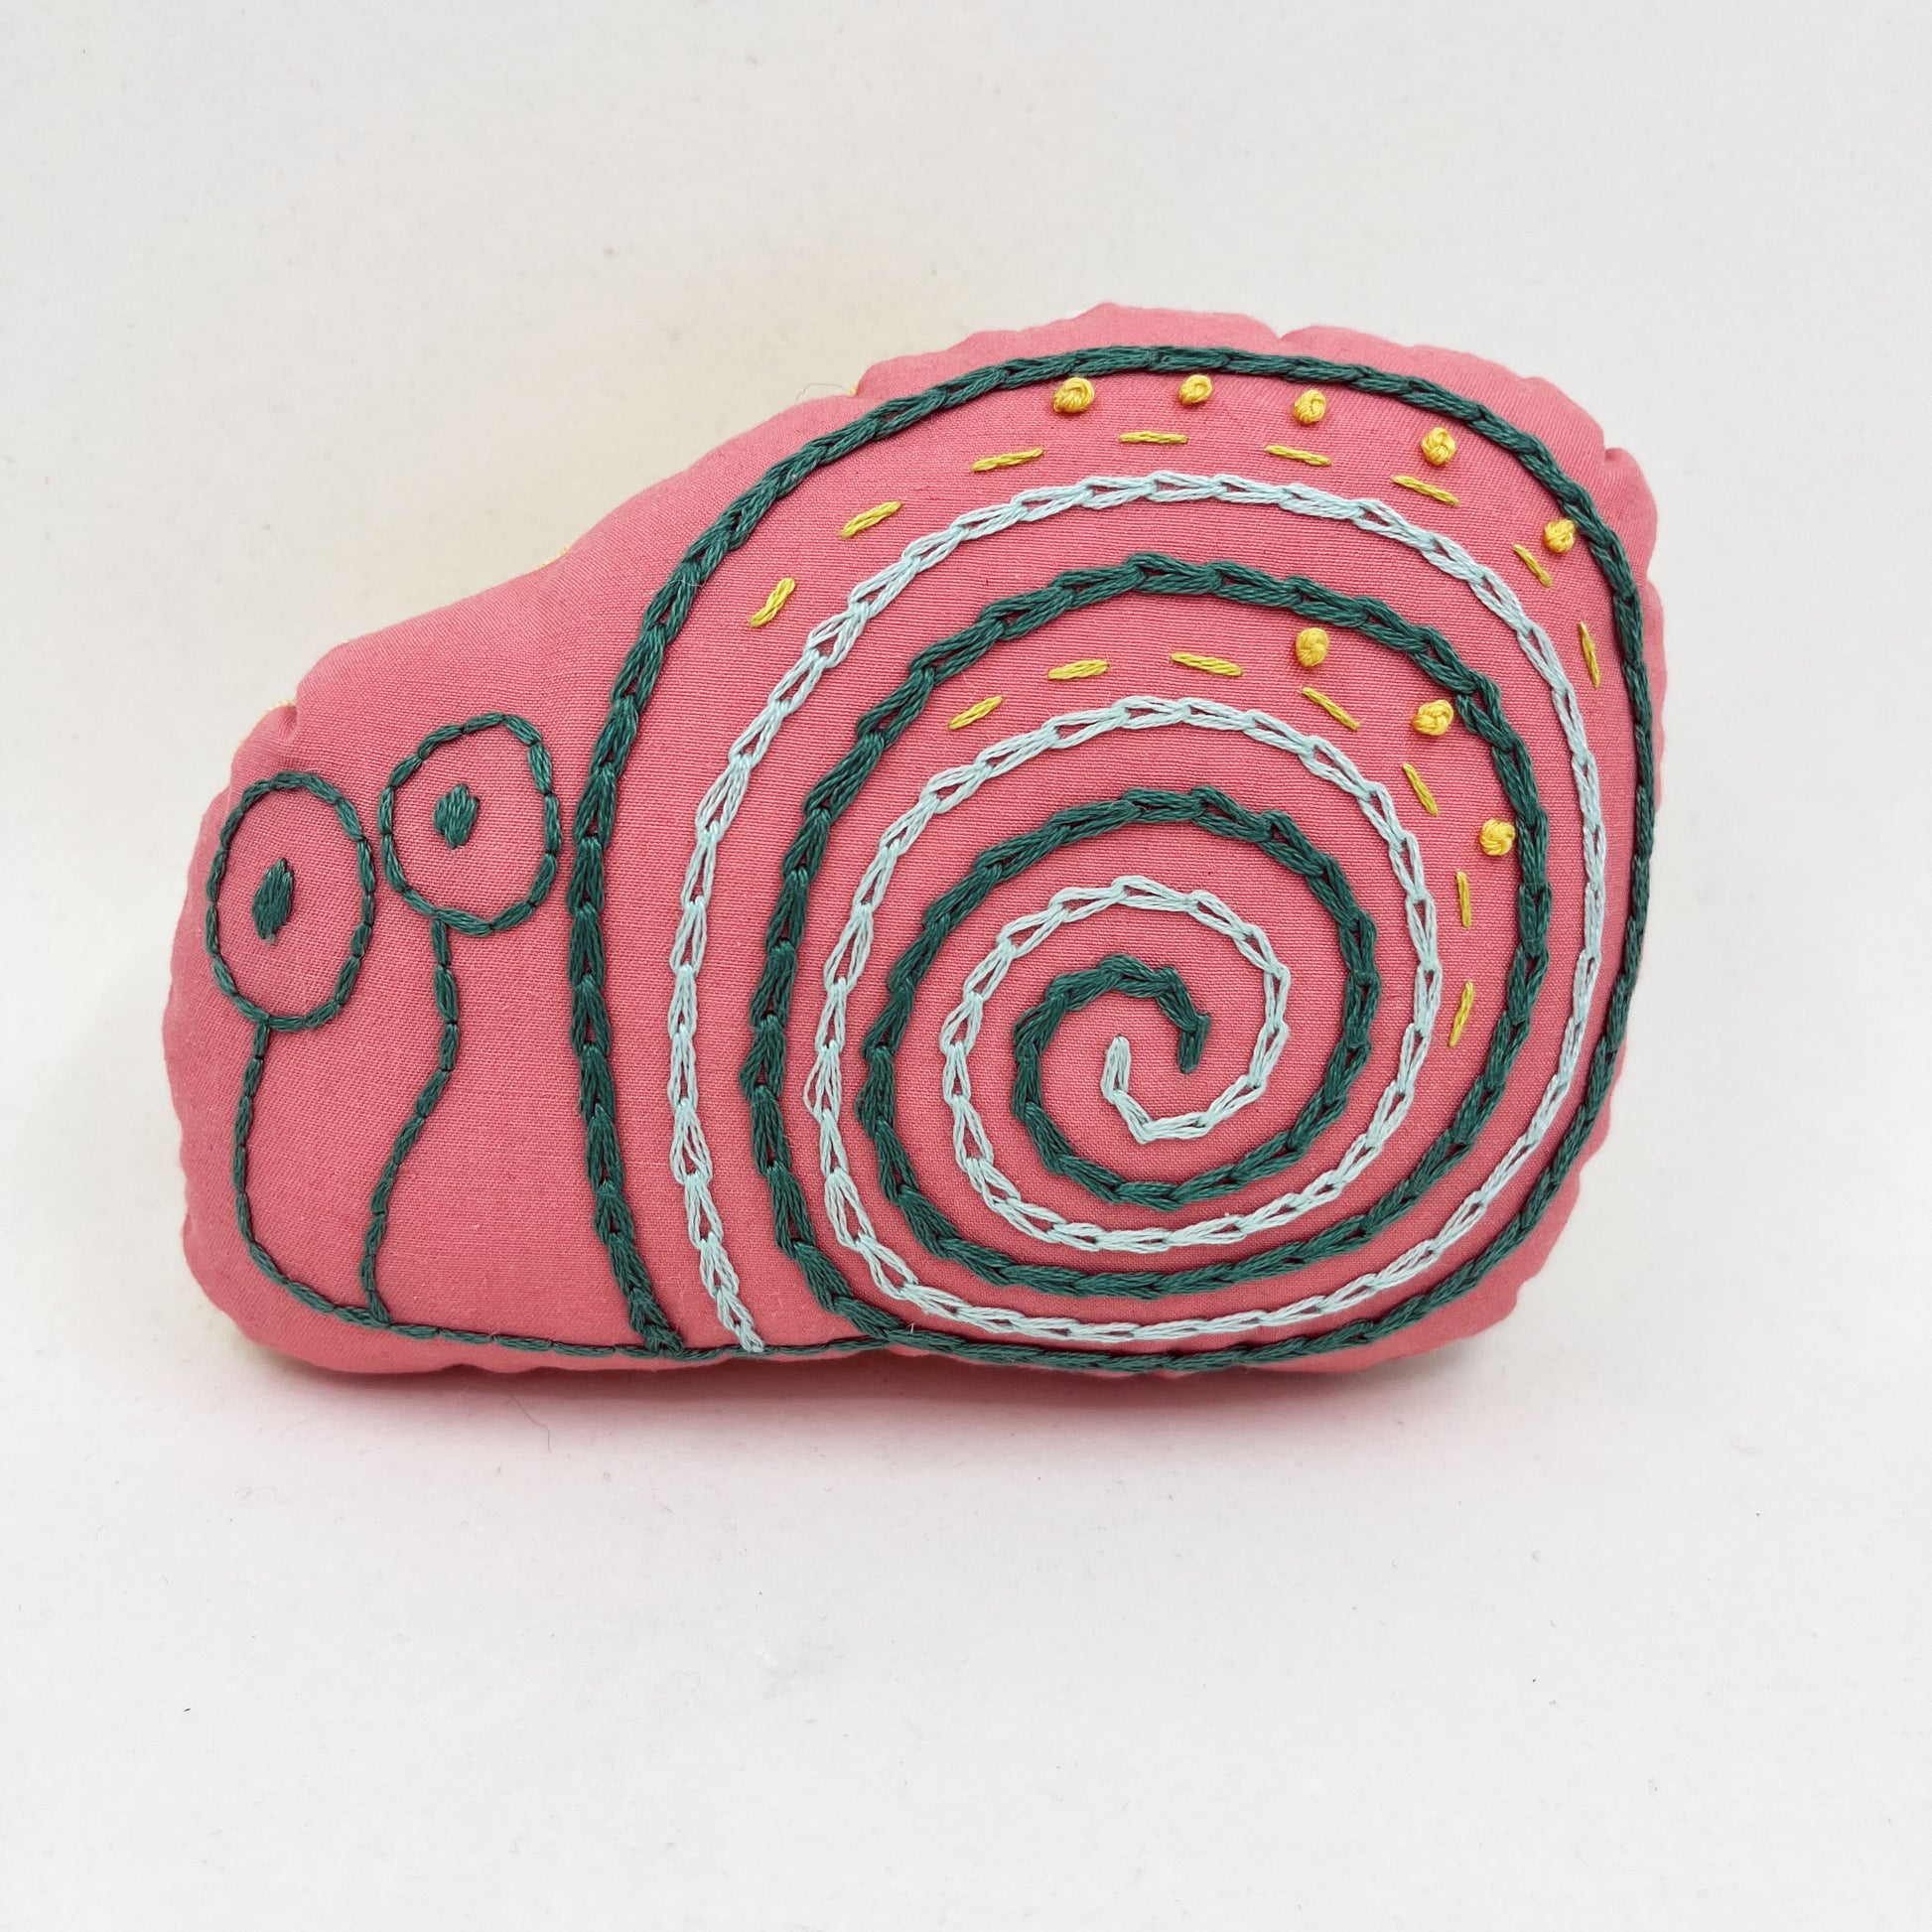 a colorfully hand embroidered stuffed pillow animal of a snail in coral fabric on a white background